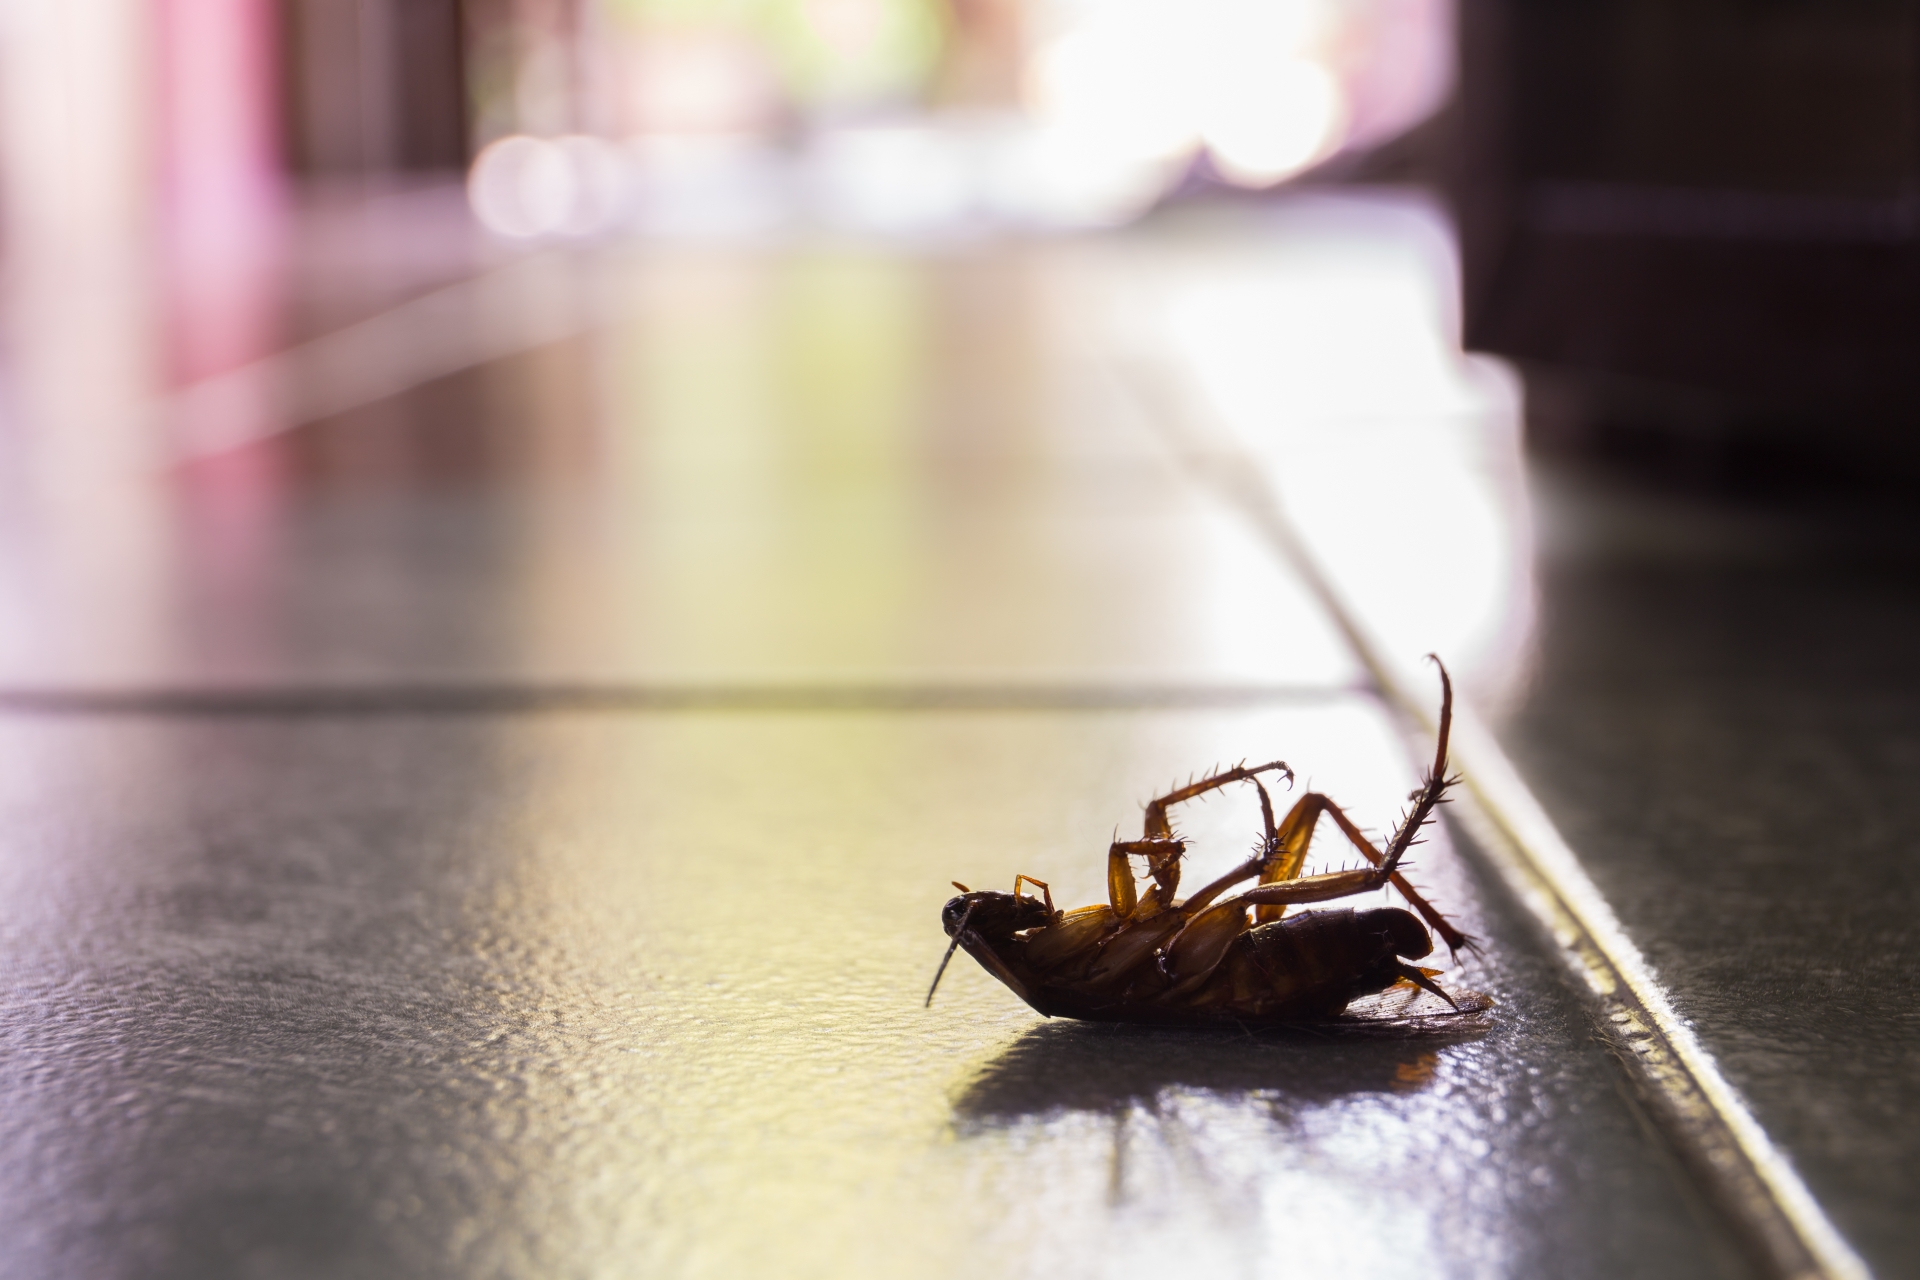 Cockroach Control, Pest Control in Enfield, EN1. Call Now 020 8166 9746